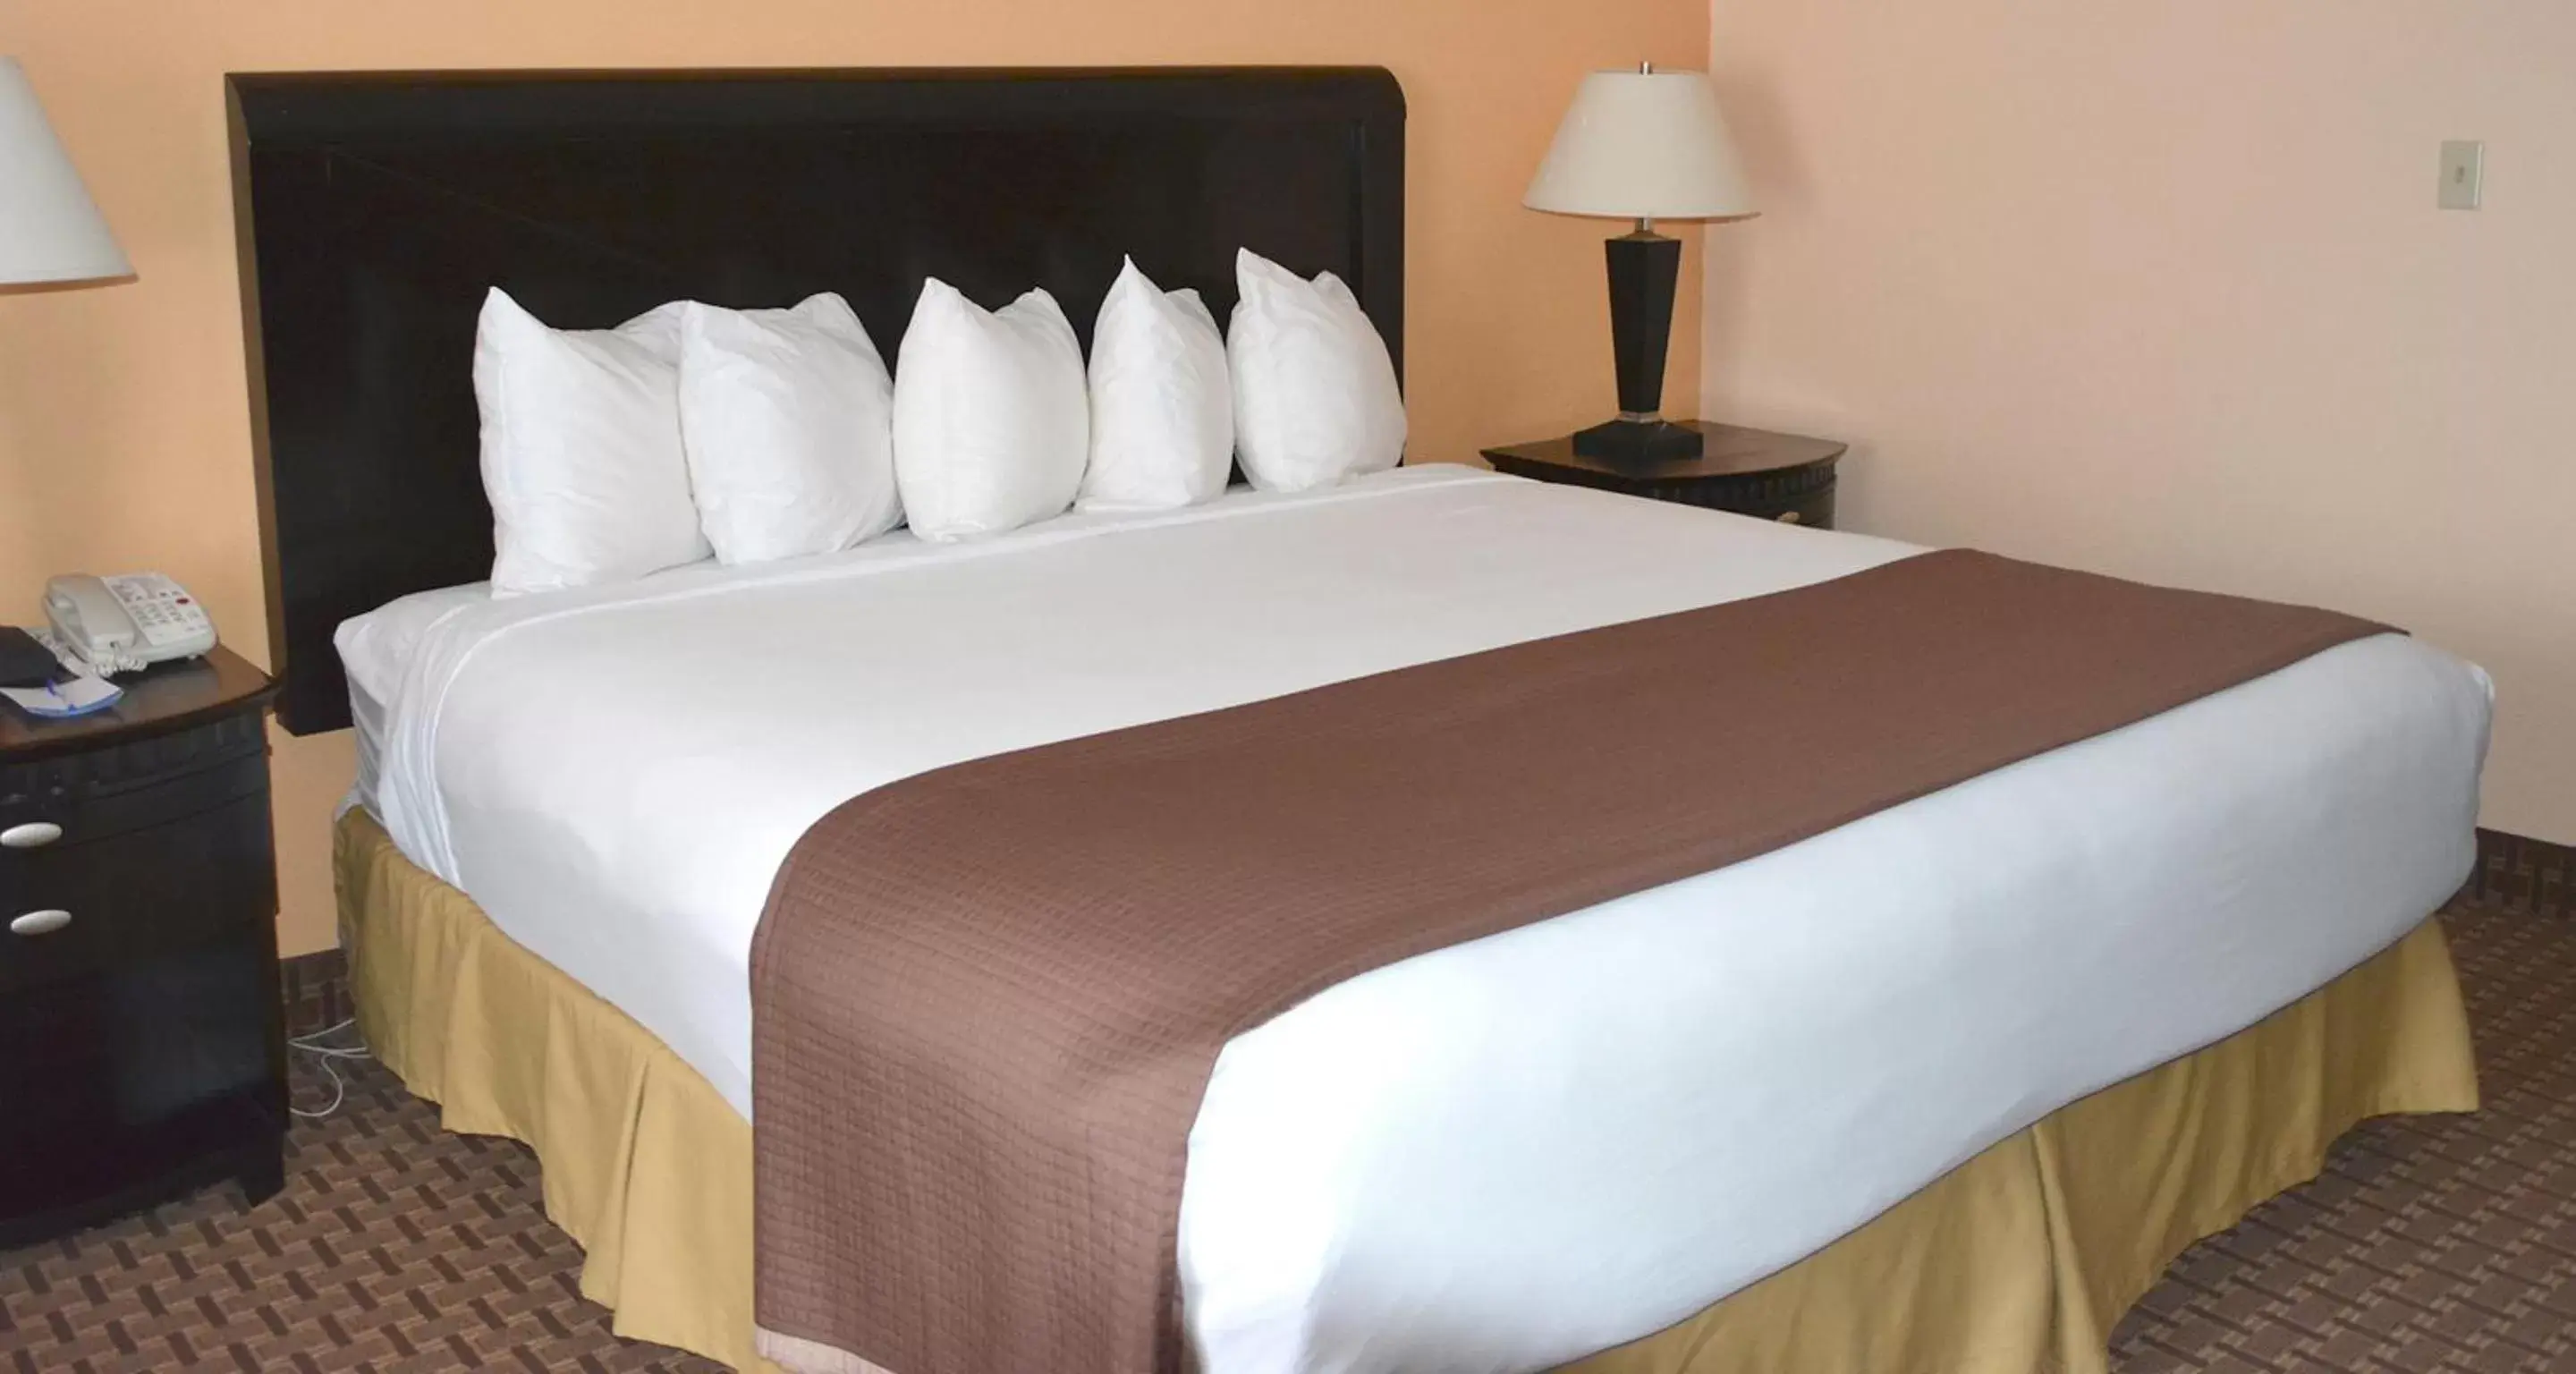 Bed, Room Photo in Baymont by Wyndham East Windsor Bradley Airport